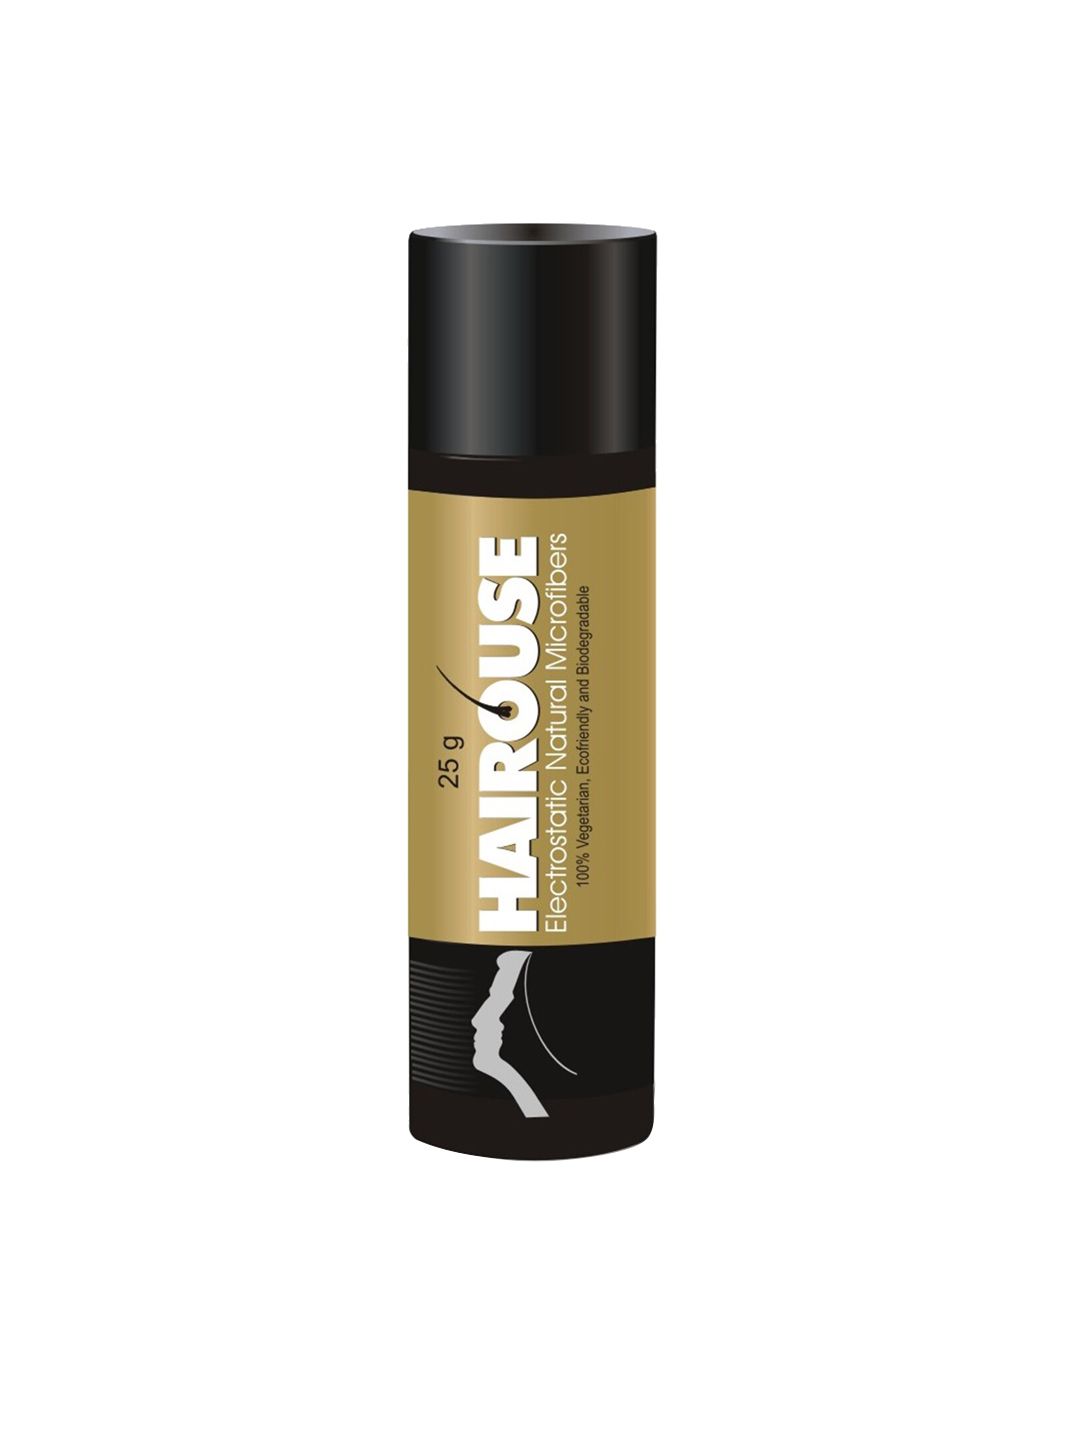 HAIROUSE Natural Hair Building Microfibers - 25g Price in India